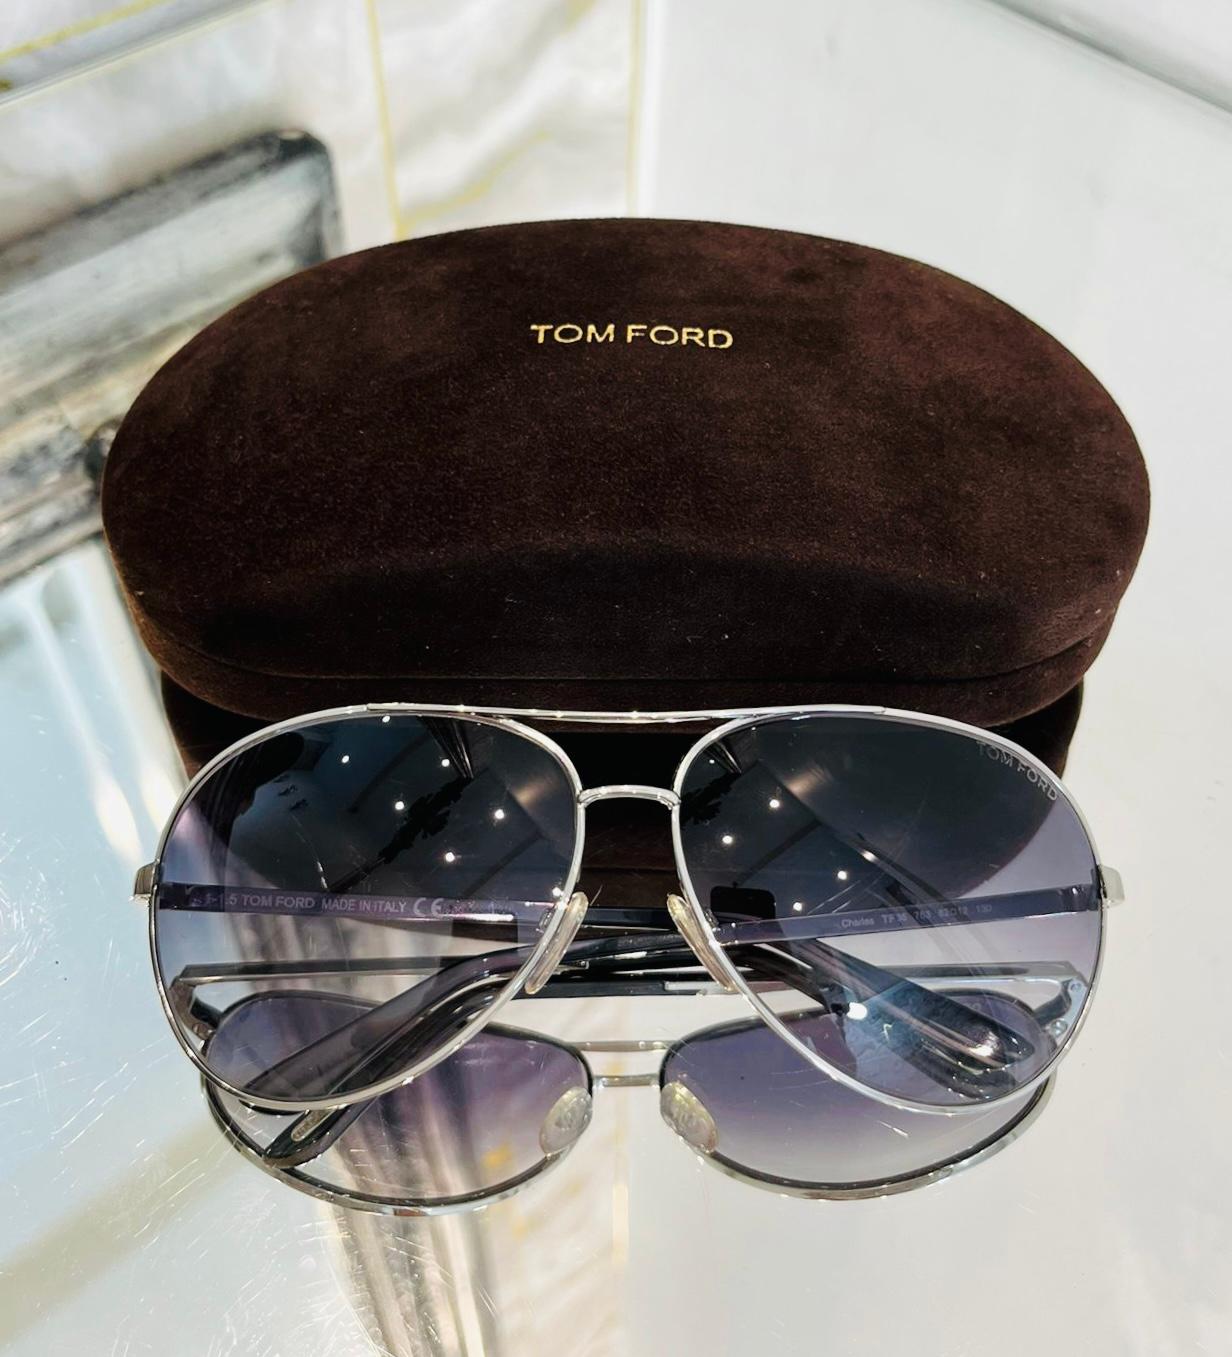 Tom Ford Charles Aviator Sunglasses

Silver, fully rimmed sunglasses designed with grey gradient lenses.

Detailed with 'Tom Ford' logo inscription to the corner.

Providing full protection from UV rays.

Size – One Size 

Condition – Very Good